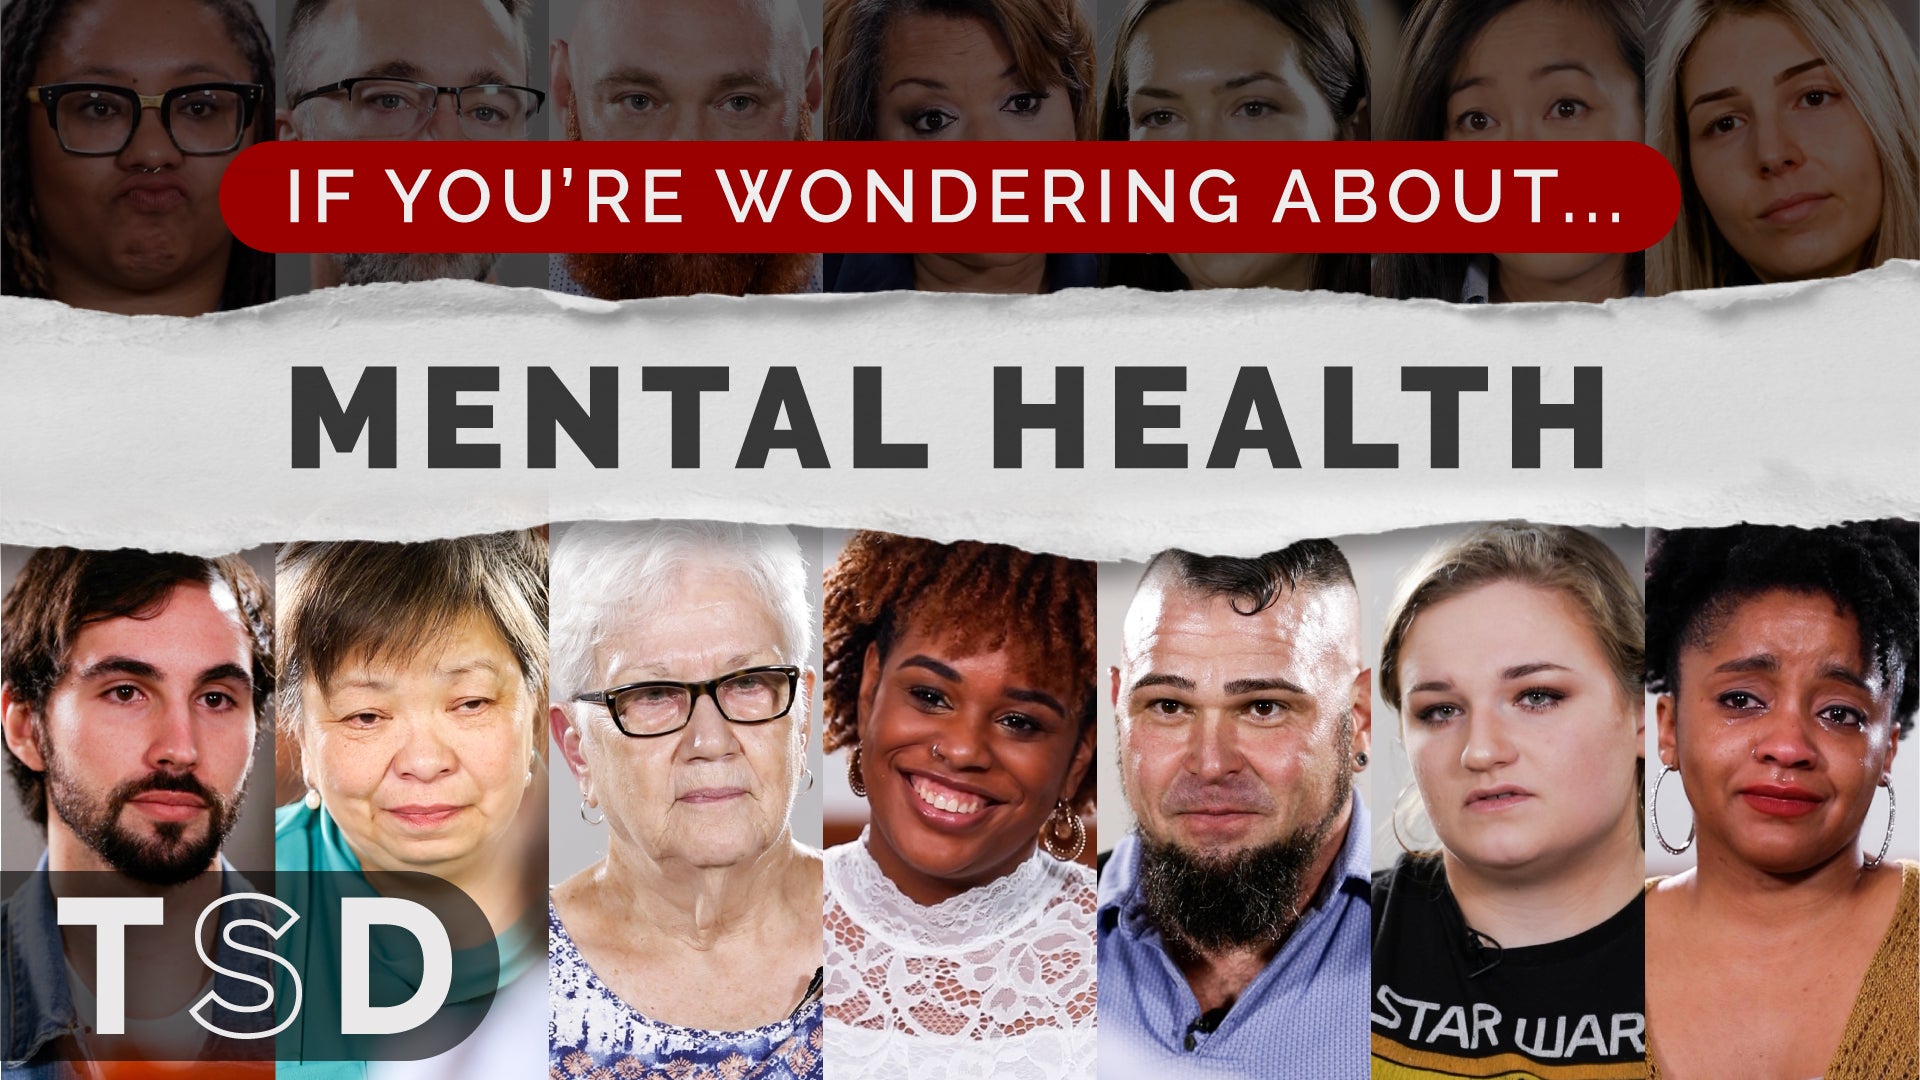 If You're Wondering About... Mental Health